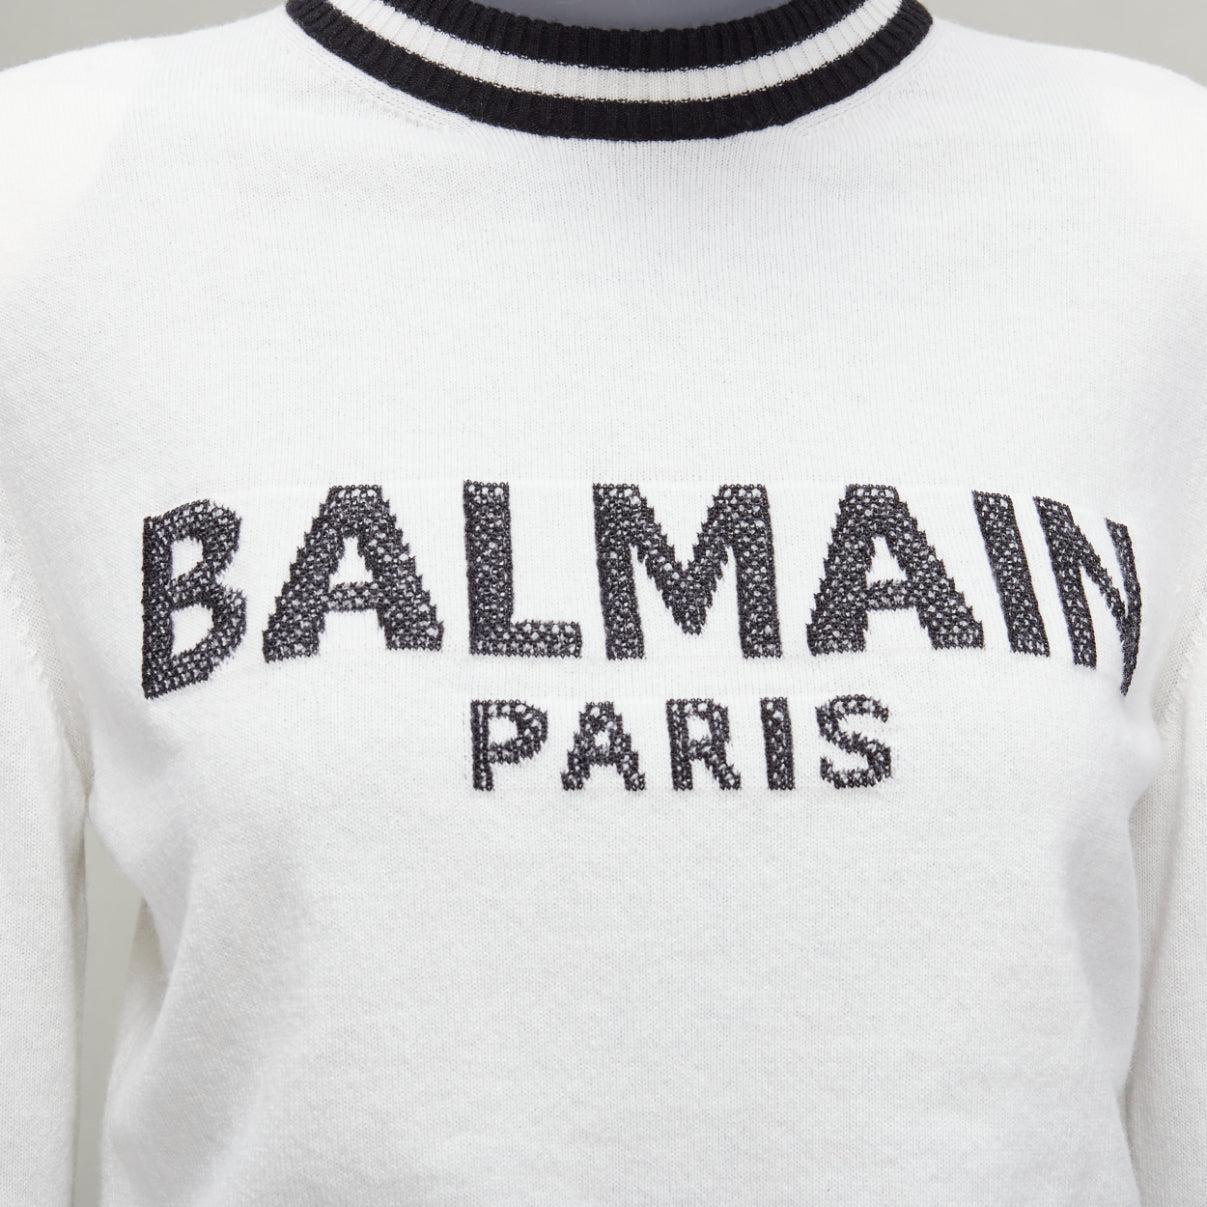 BALMAIN cream black wool cashmere logo padded shoulder sweater FR34 XS
Reference: AAWC/A00817
Brand: Balmain
Designer: Olivier Rousteing
Collection: AW21
Material: Wool, Cashmere, Blend
Color: Cream, Black
Pattern: Solid
Closure: Pullover
Extra